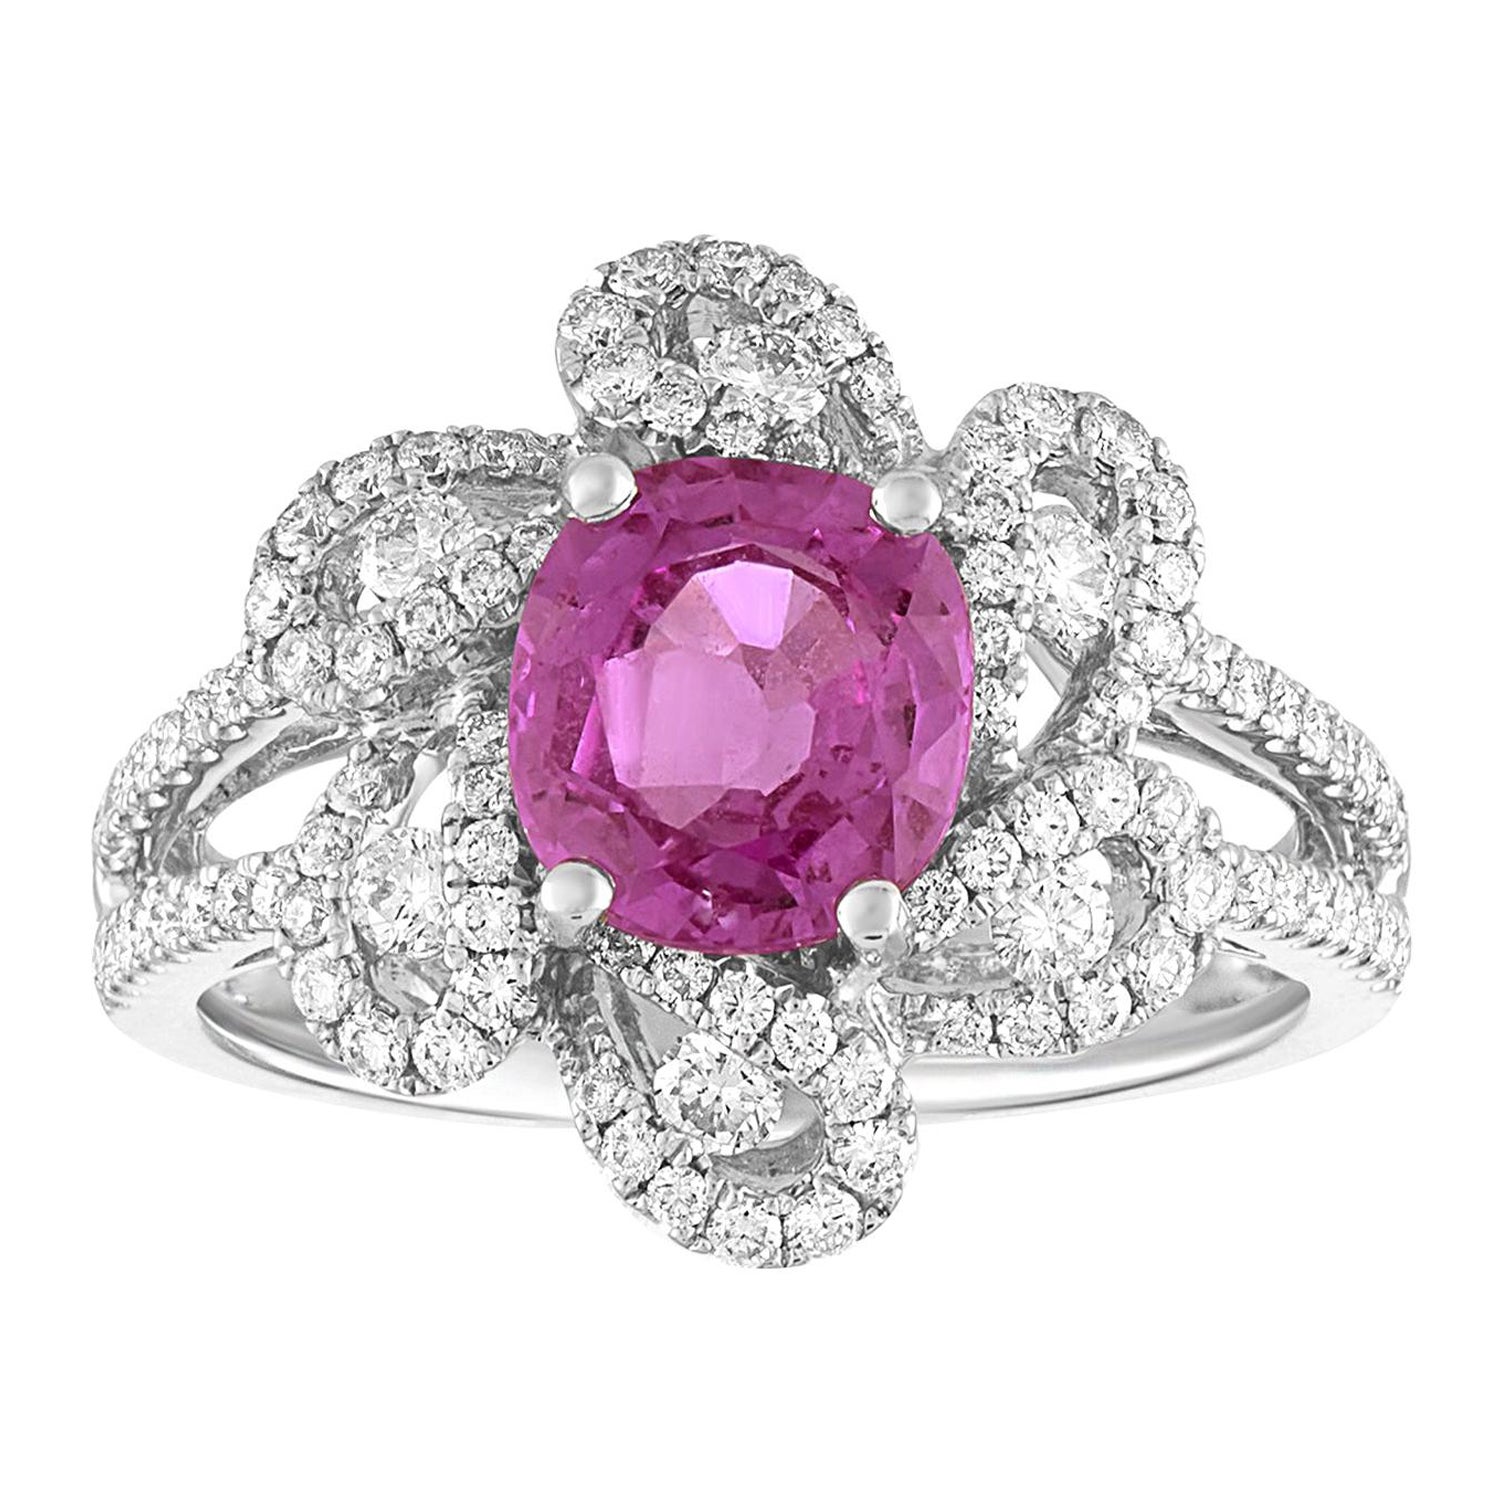 AGL Certified 1.90 Carat Cushion Pink Sapphire Diamond Gold Ring For Sale